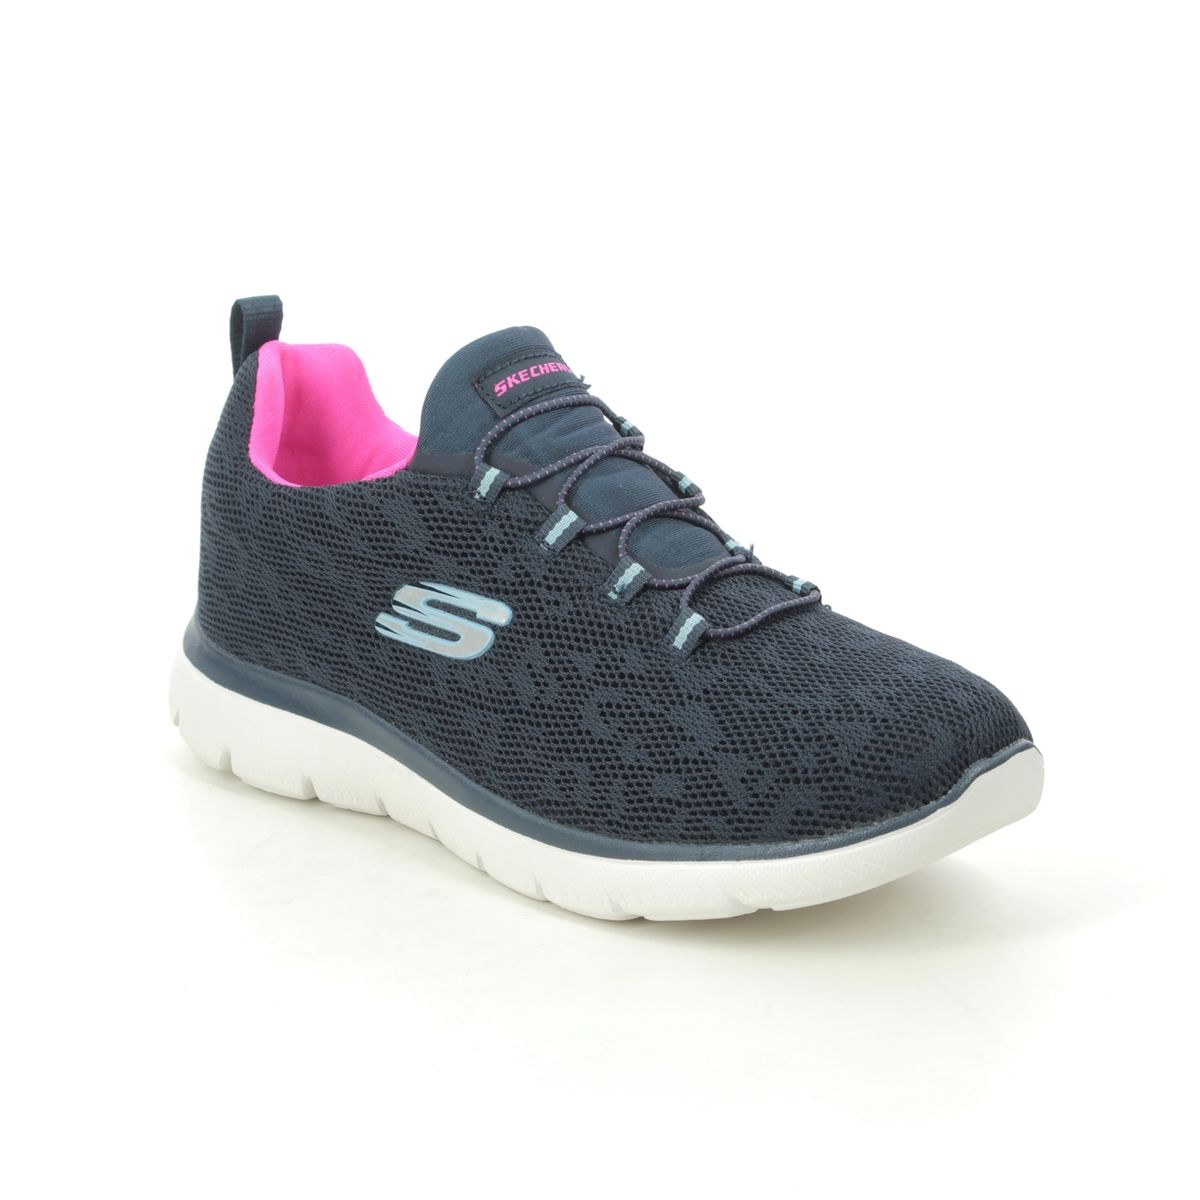 skechers trainers pink